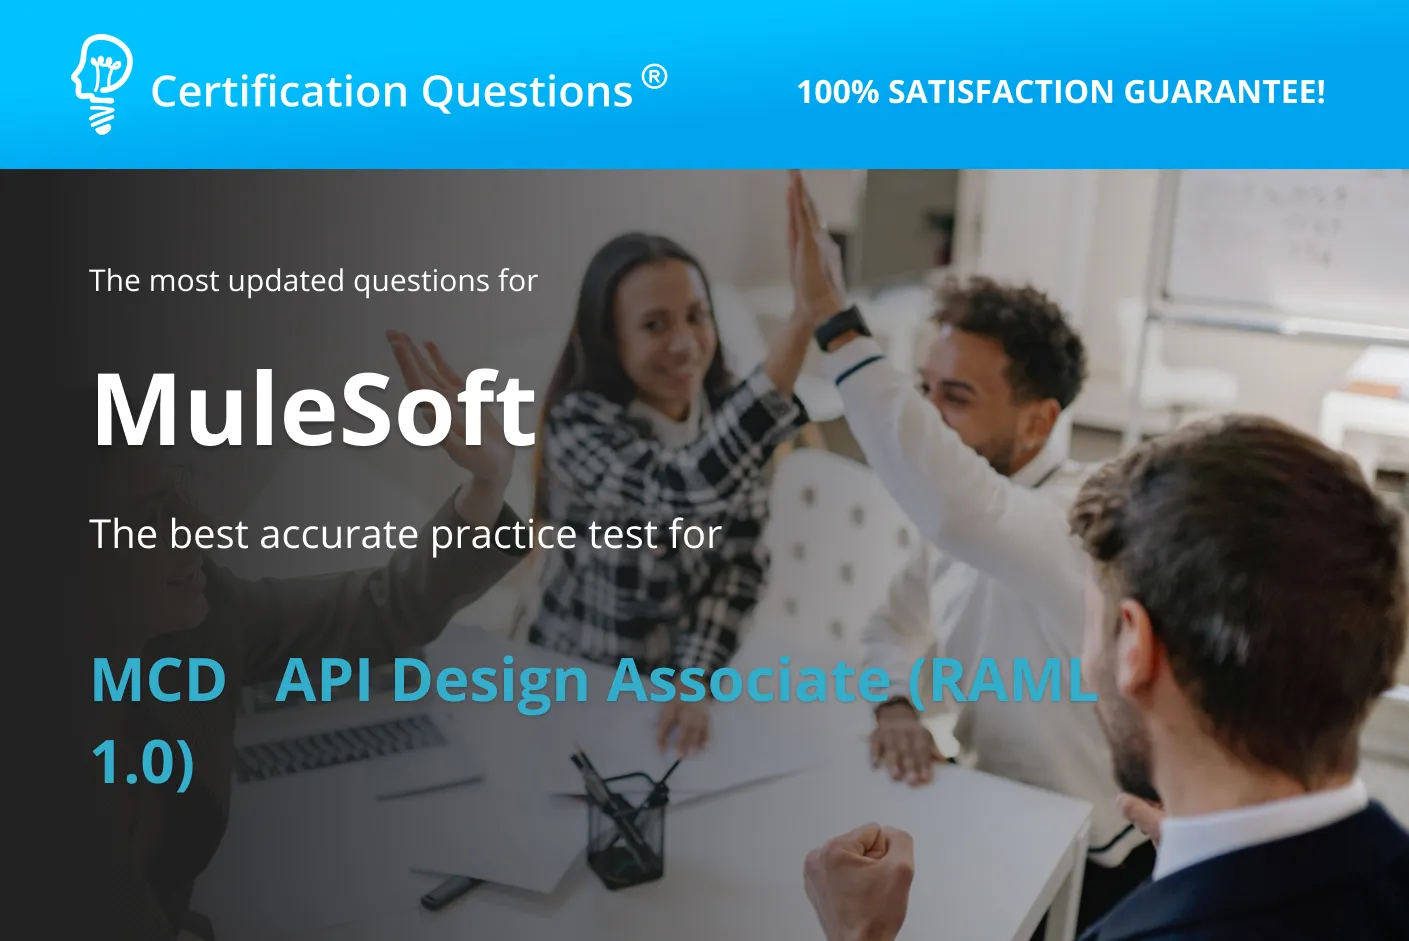 This image is related to the mulesoft certification questions for the preparation